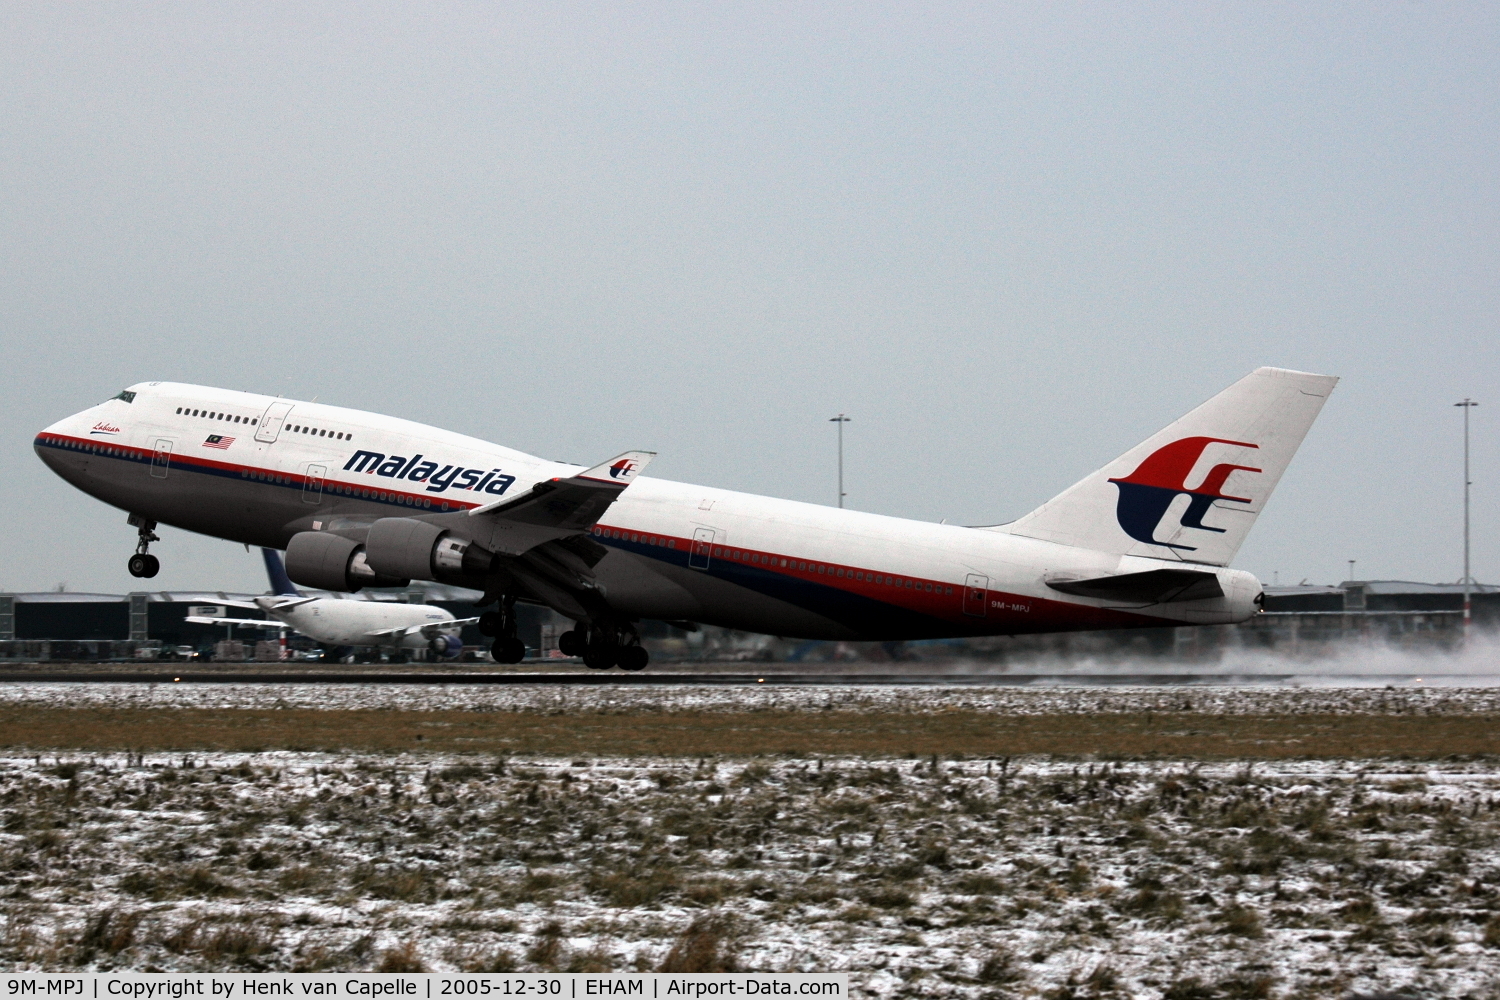 9M-MPJ, 1997 Boeing 747-4H6 C/N 28426, Malaysia Airlines Boeing 747-400 kicking up snow while taking off from Amsterdam Schiphol airport, the Metherlands.